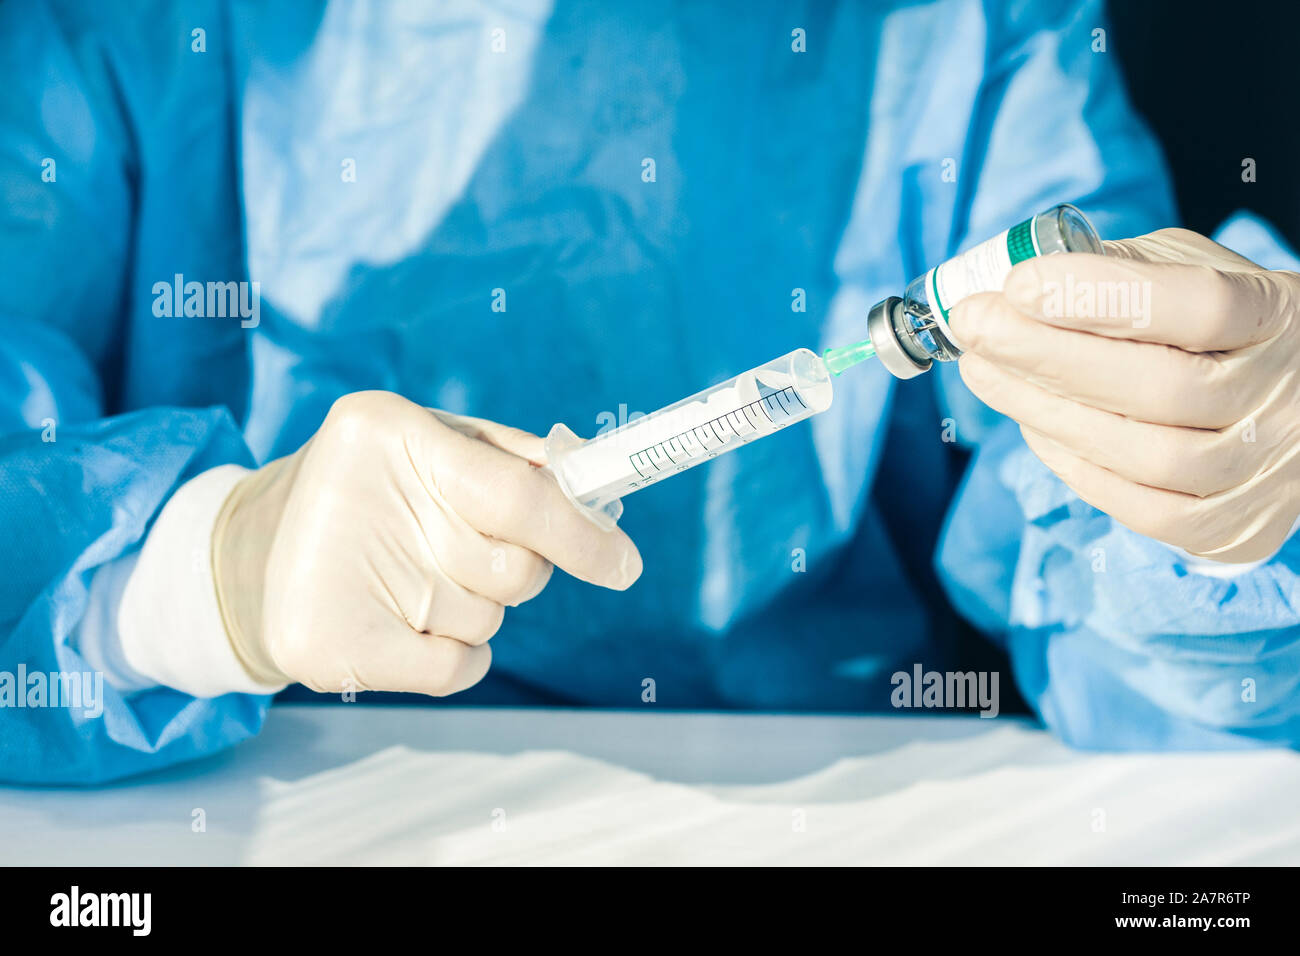 doctor in a blue surgical gown and mask holds in his hand a medical syringe and bottle with drugs for injection Stock Photo